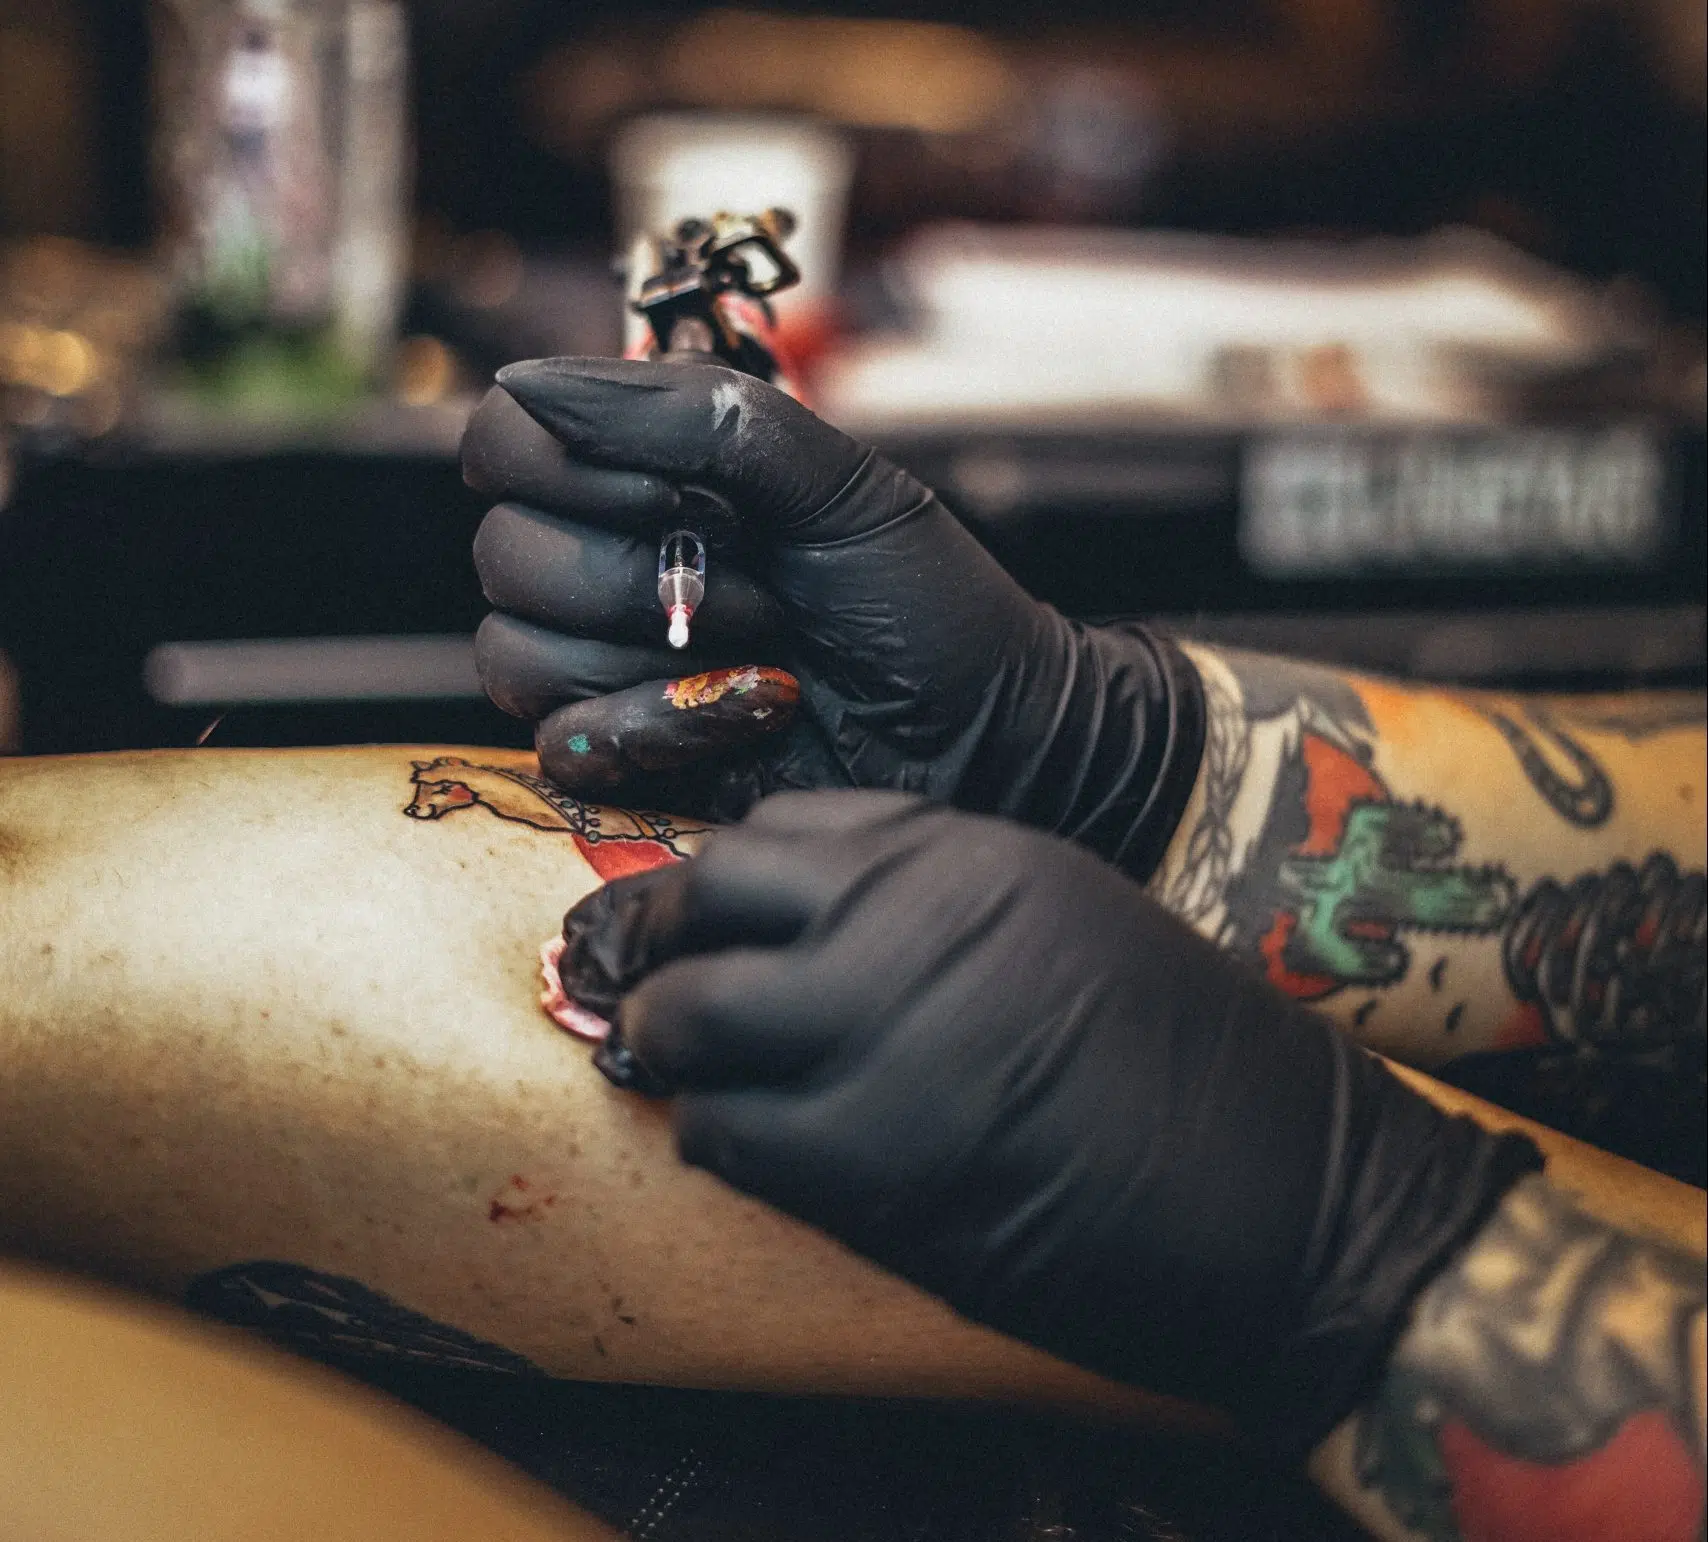 Researchers develop painless tattoos that can be self-administered